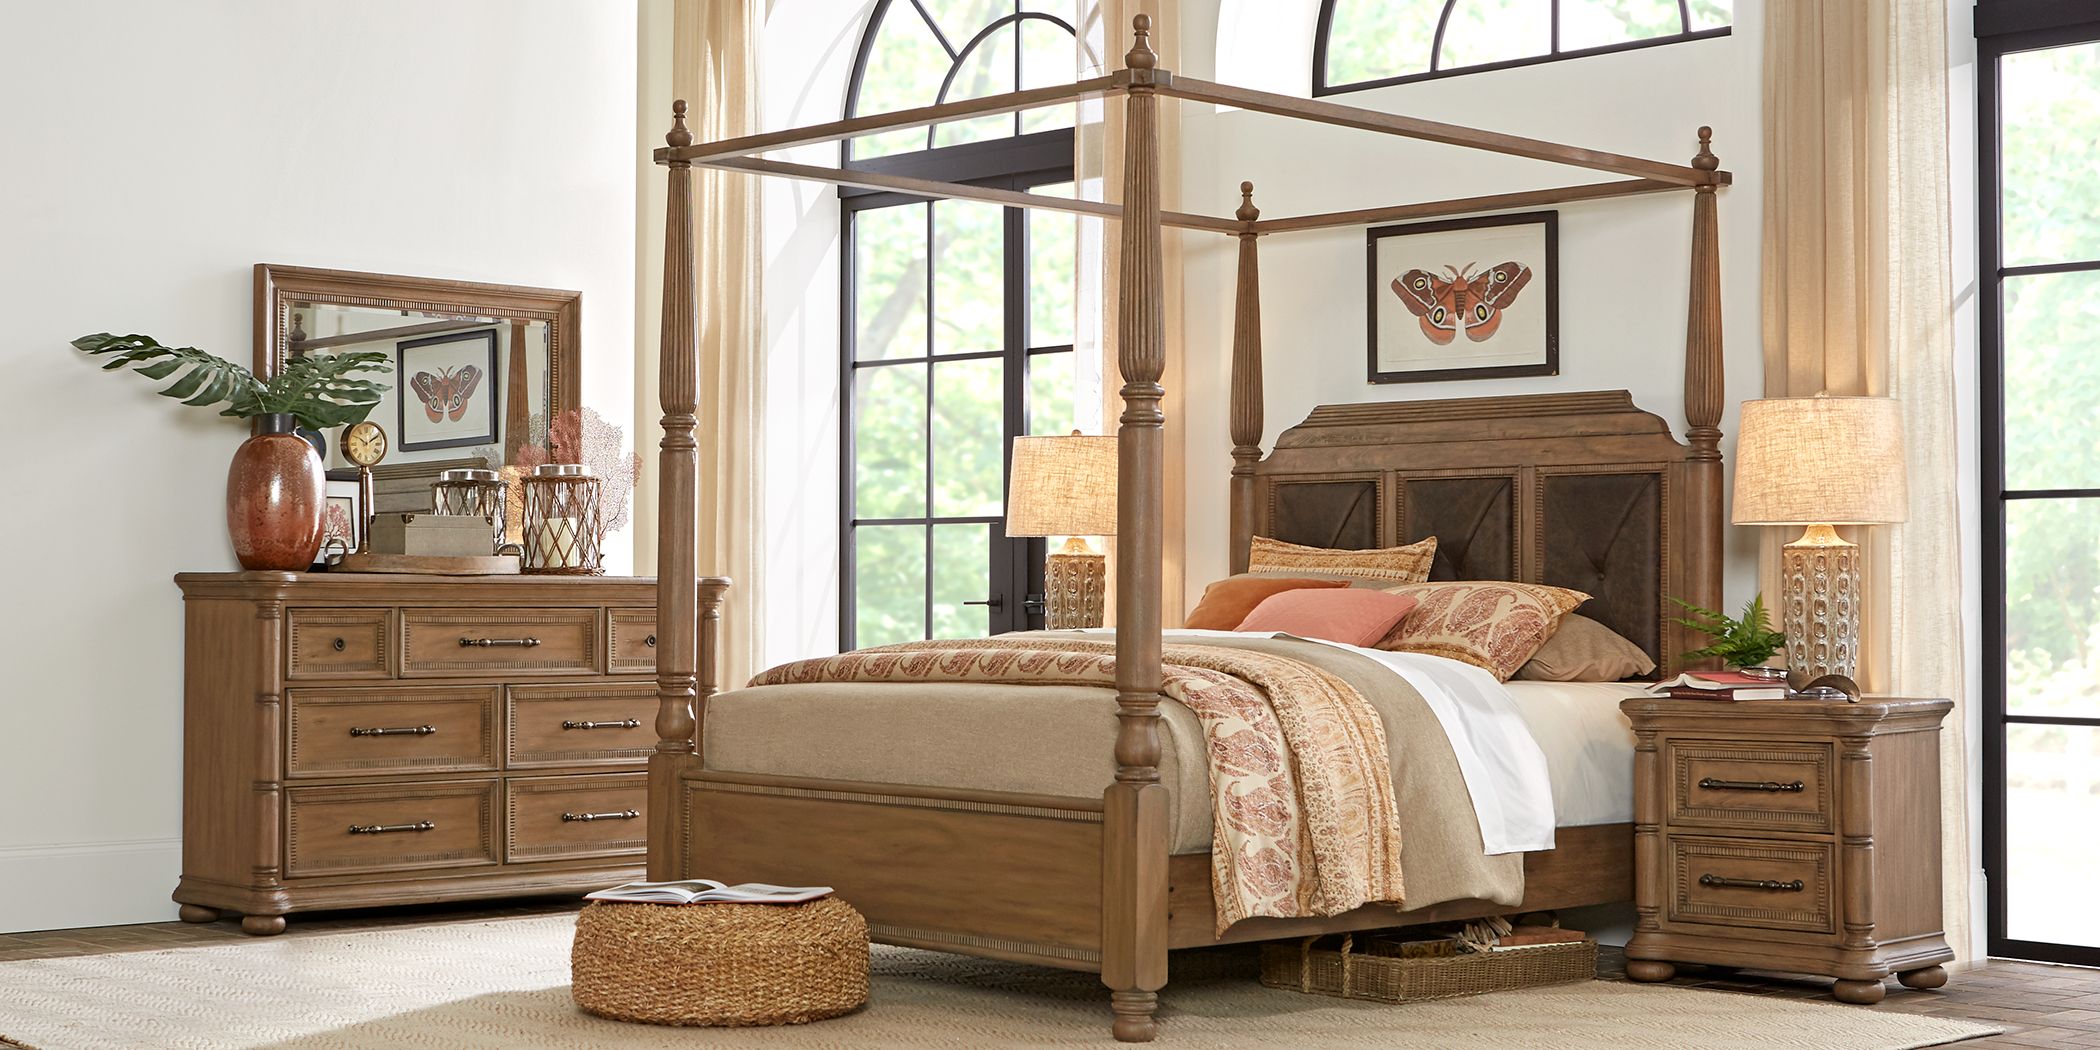 cindy crawford canopy bedroom furniture